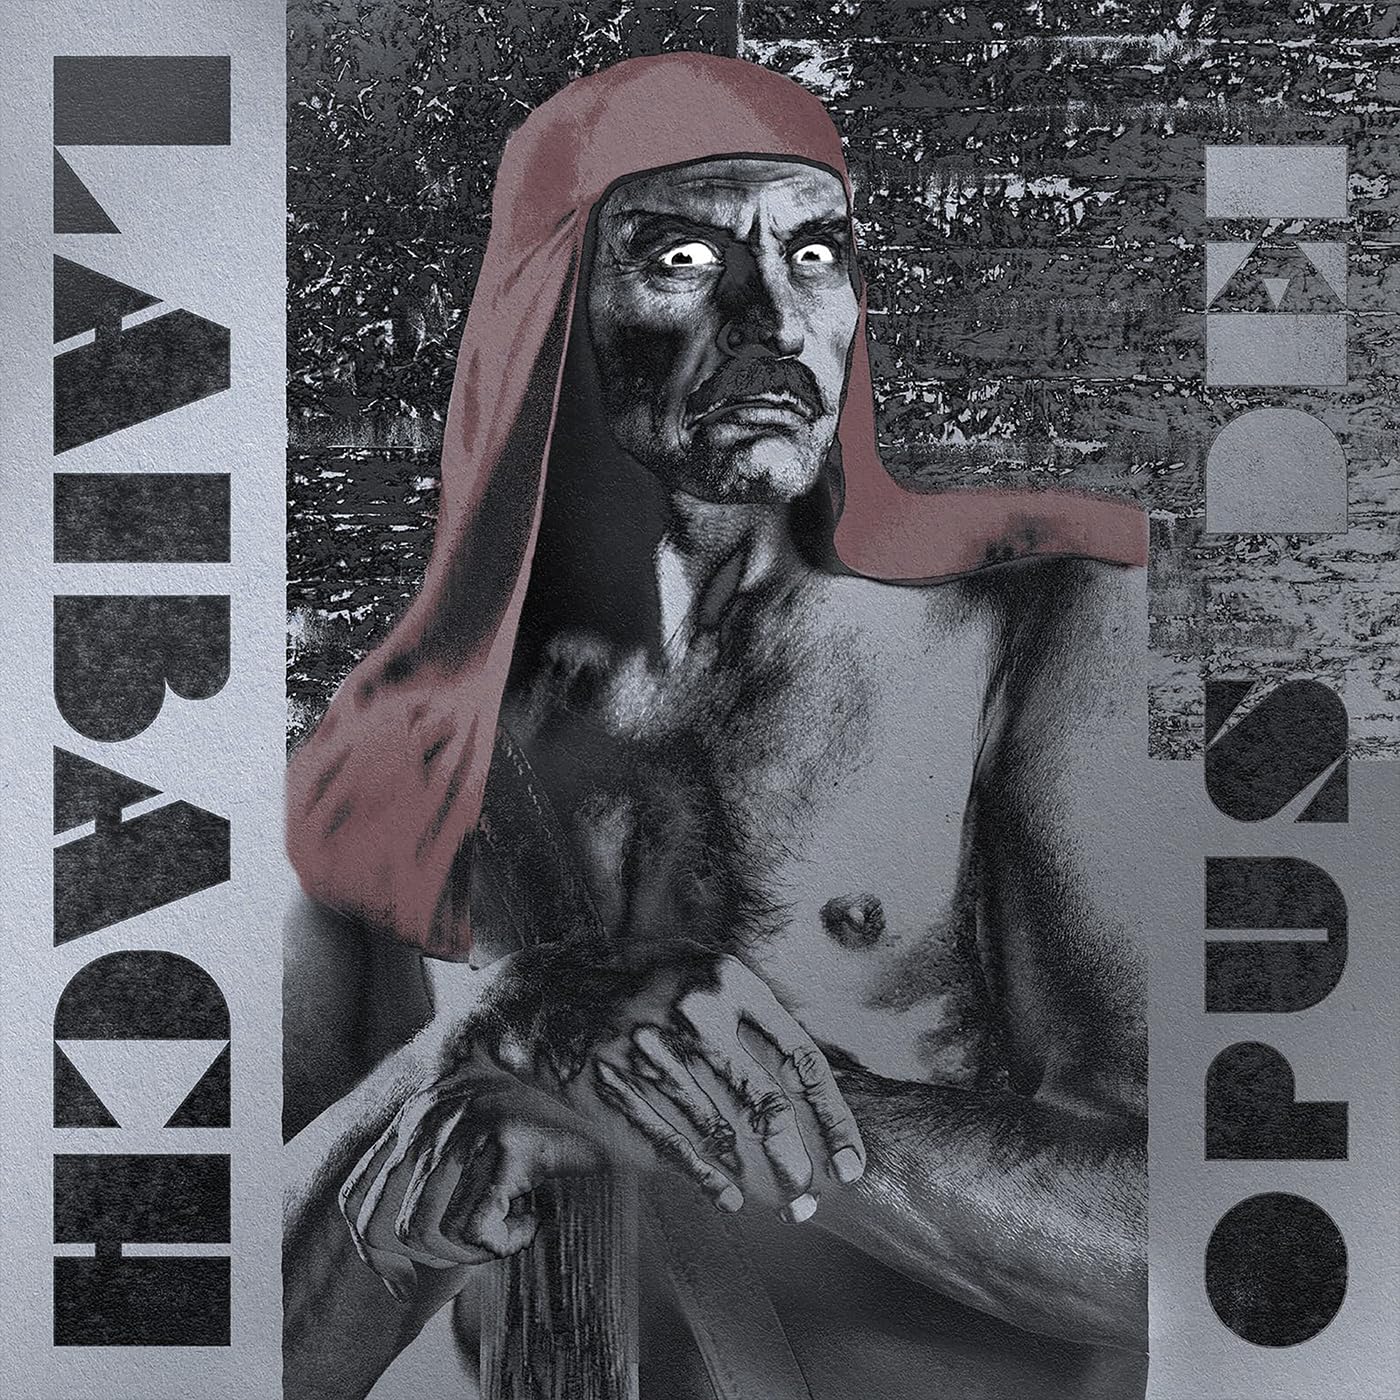 LAIBACH – OPUS DEI remastered & redesigned CD2